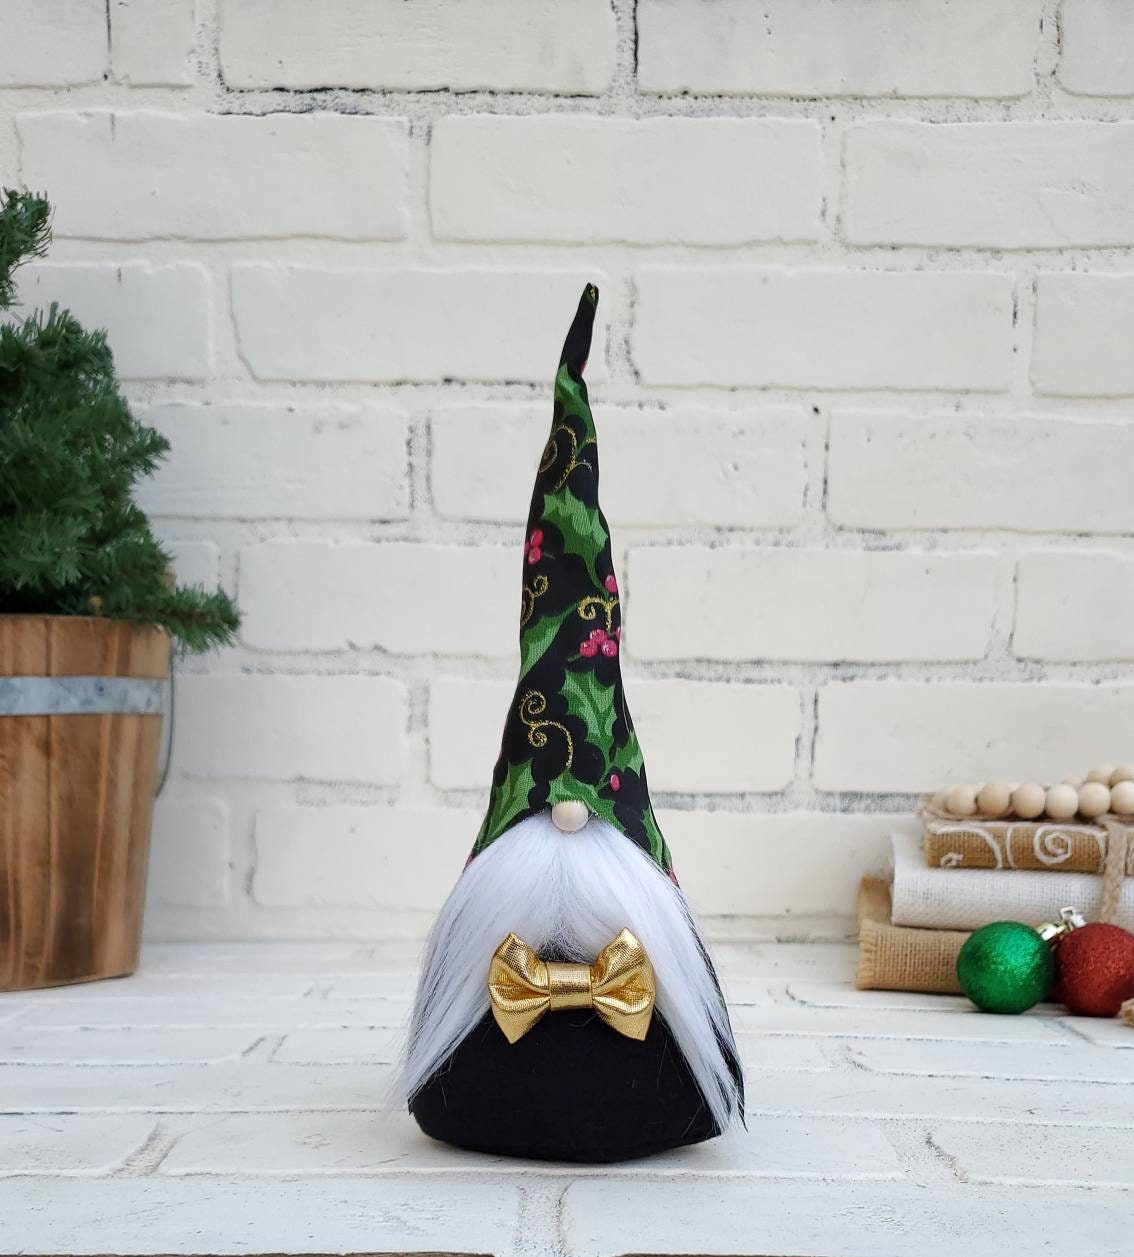 Christmas Holly Gnome with white beard & black body. Complete with gold bow tie. This handmade KyElle Kreations gnome measures 9 inches.. Displayed with faux foliage and seasonal accent decor.